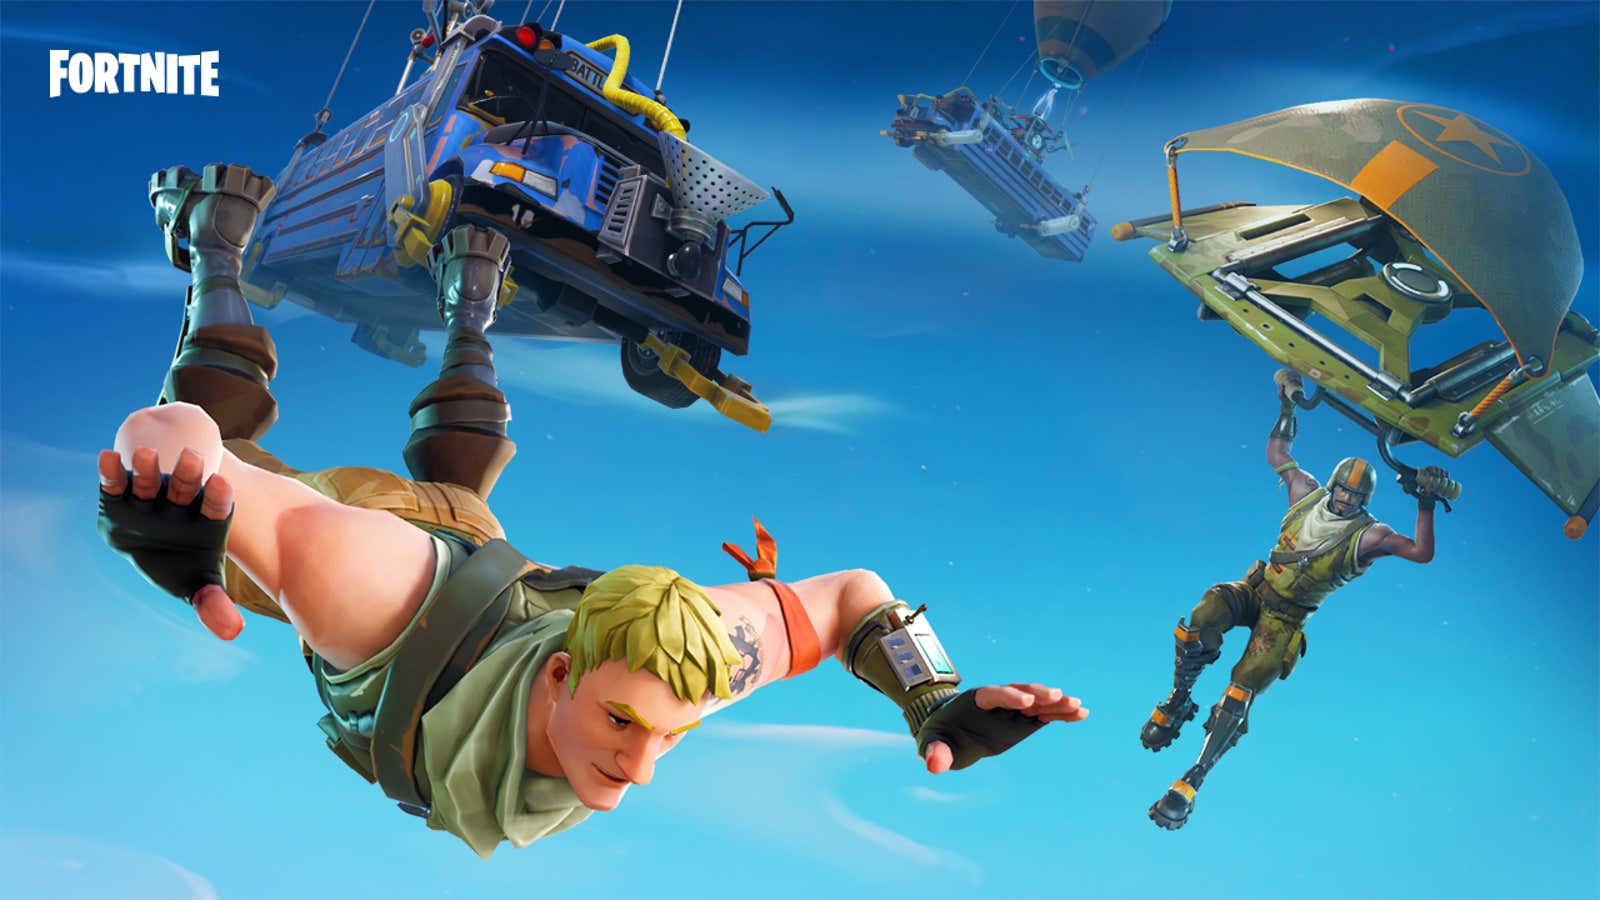 Fortnite Battle Royale is swapping the Final Fight limited-time mode with the tried-and-tested 50v50 LTM.